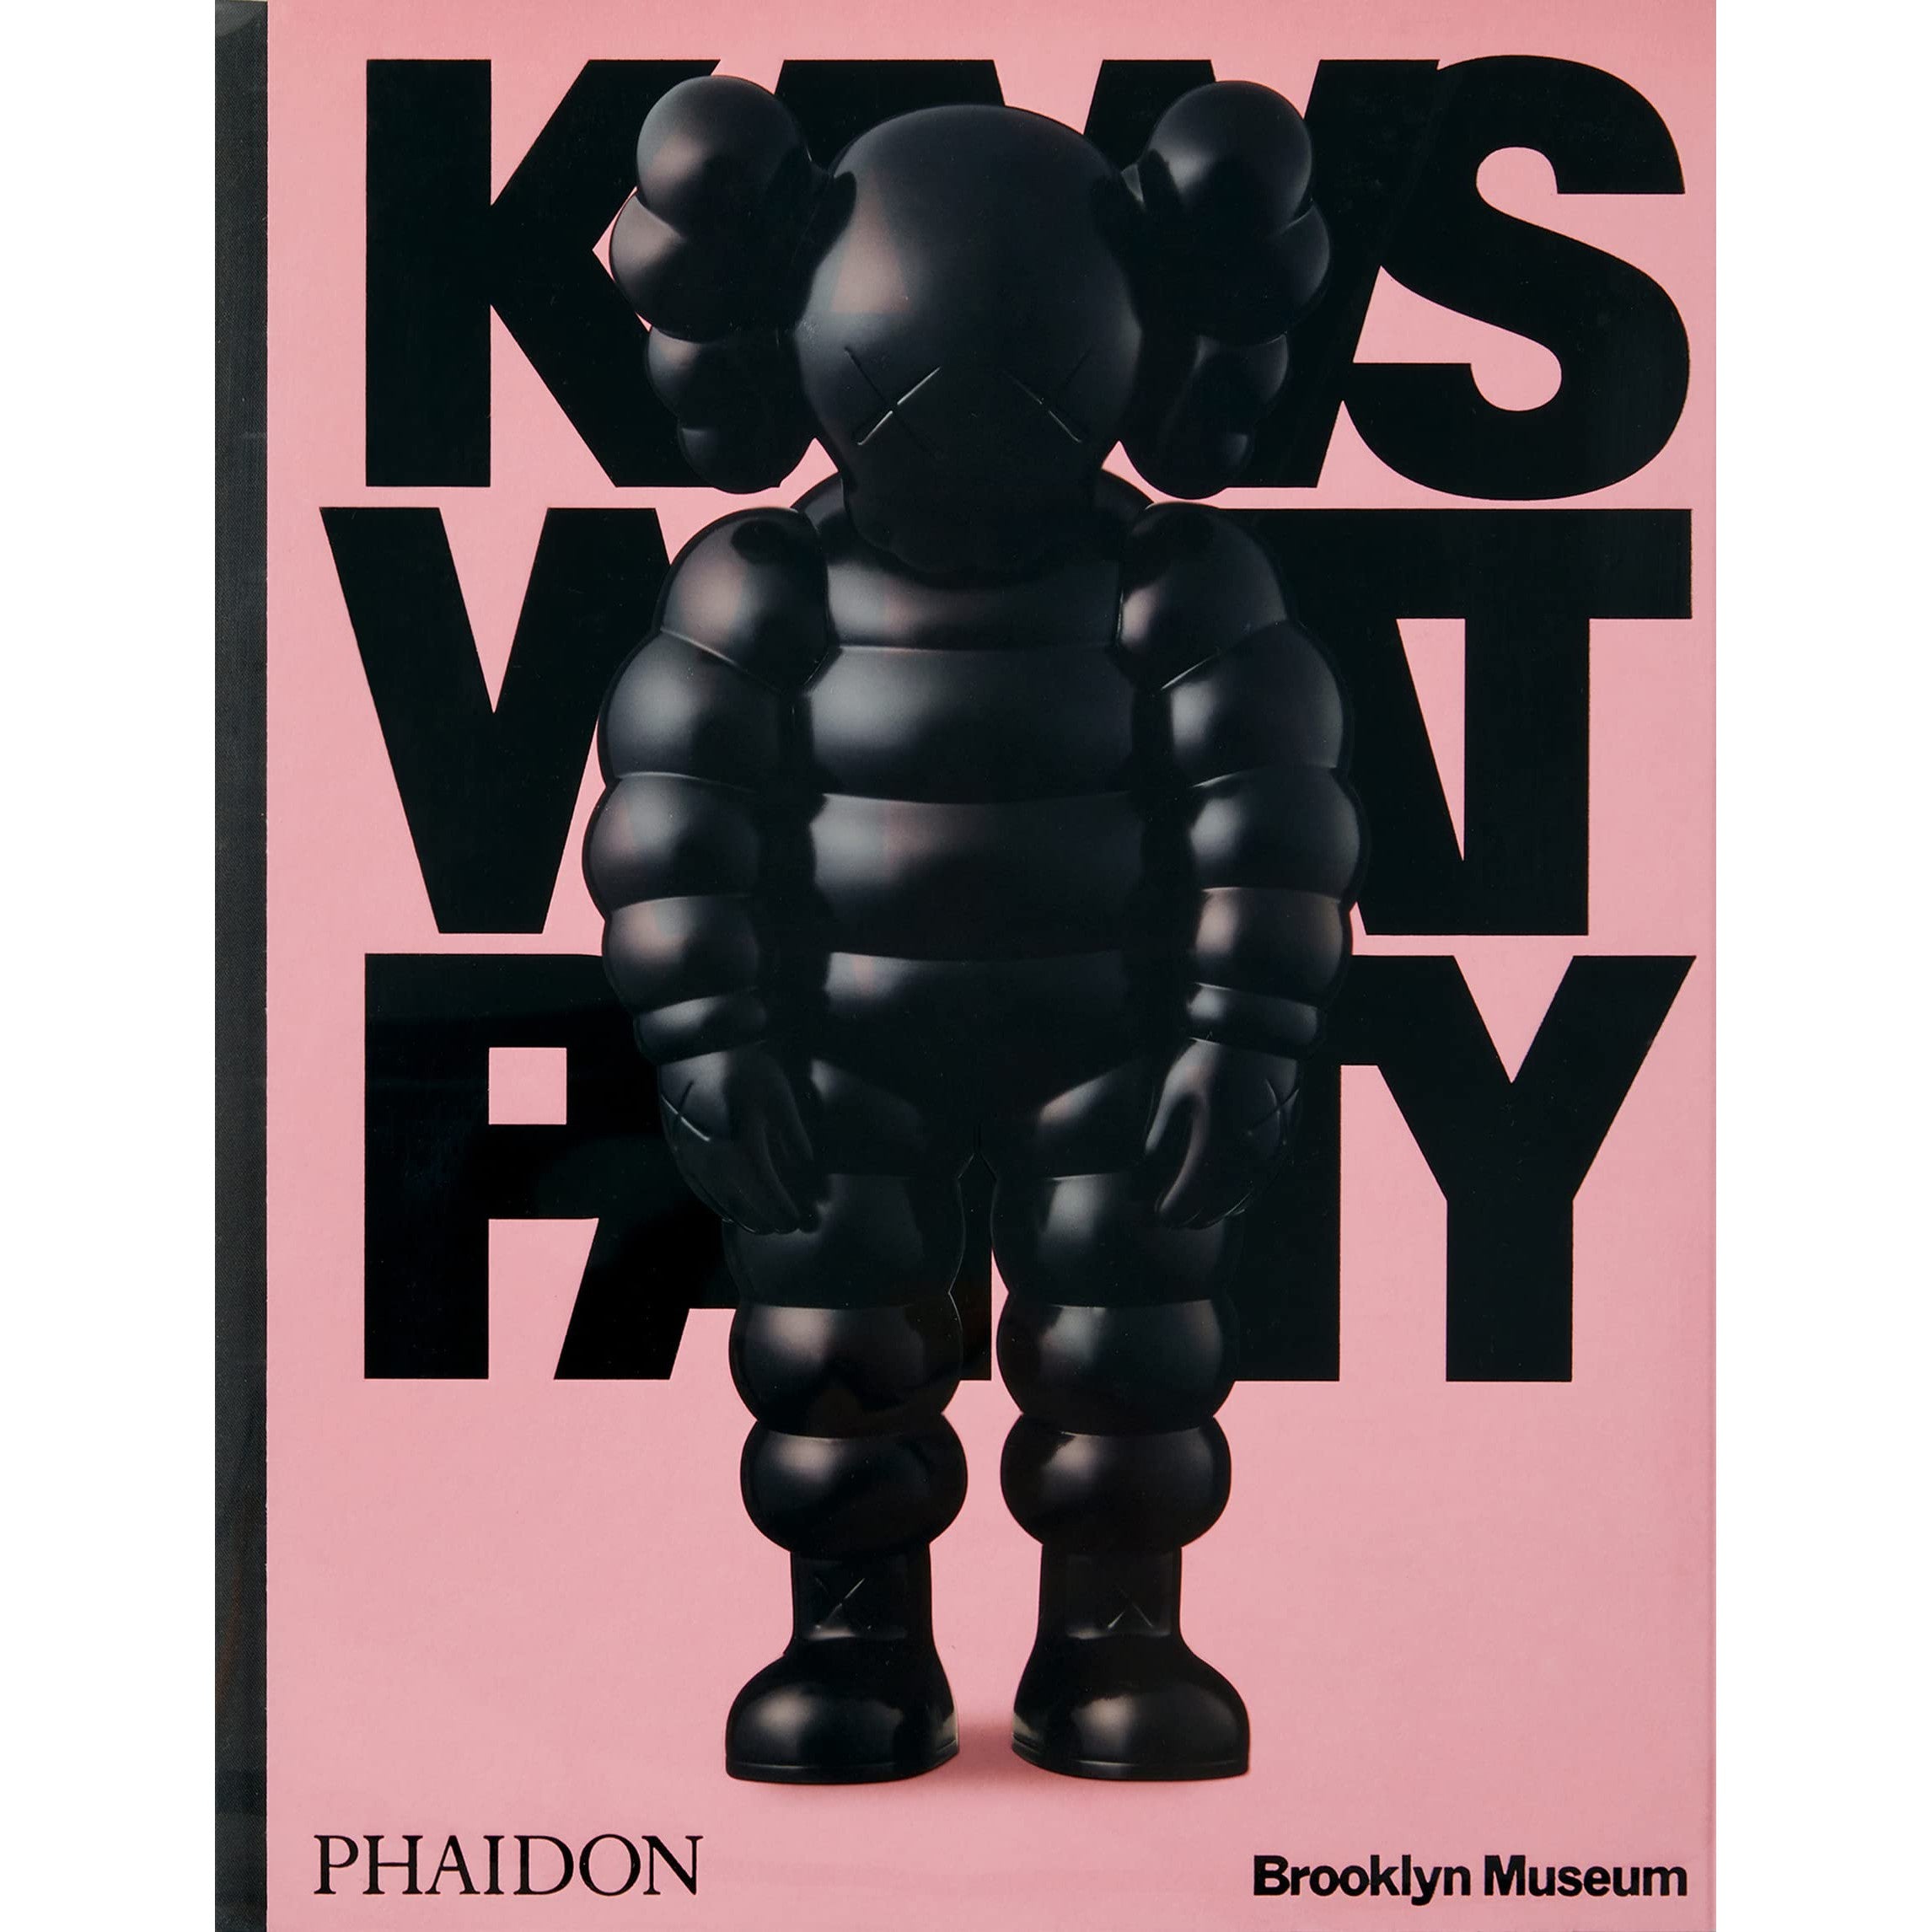 POSTER 8 WORKS by KAWS on artnet